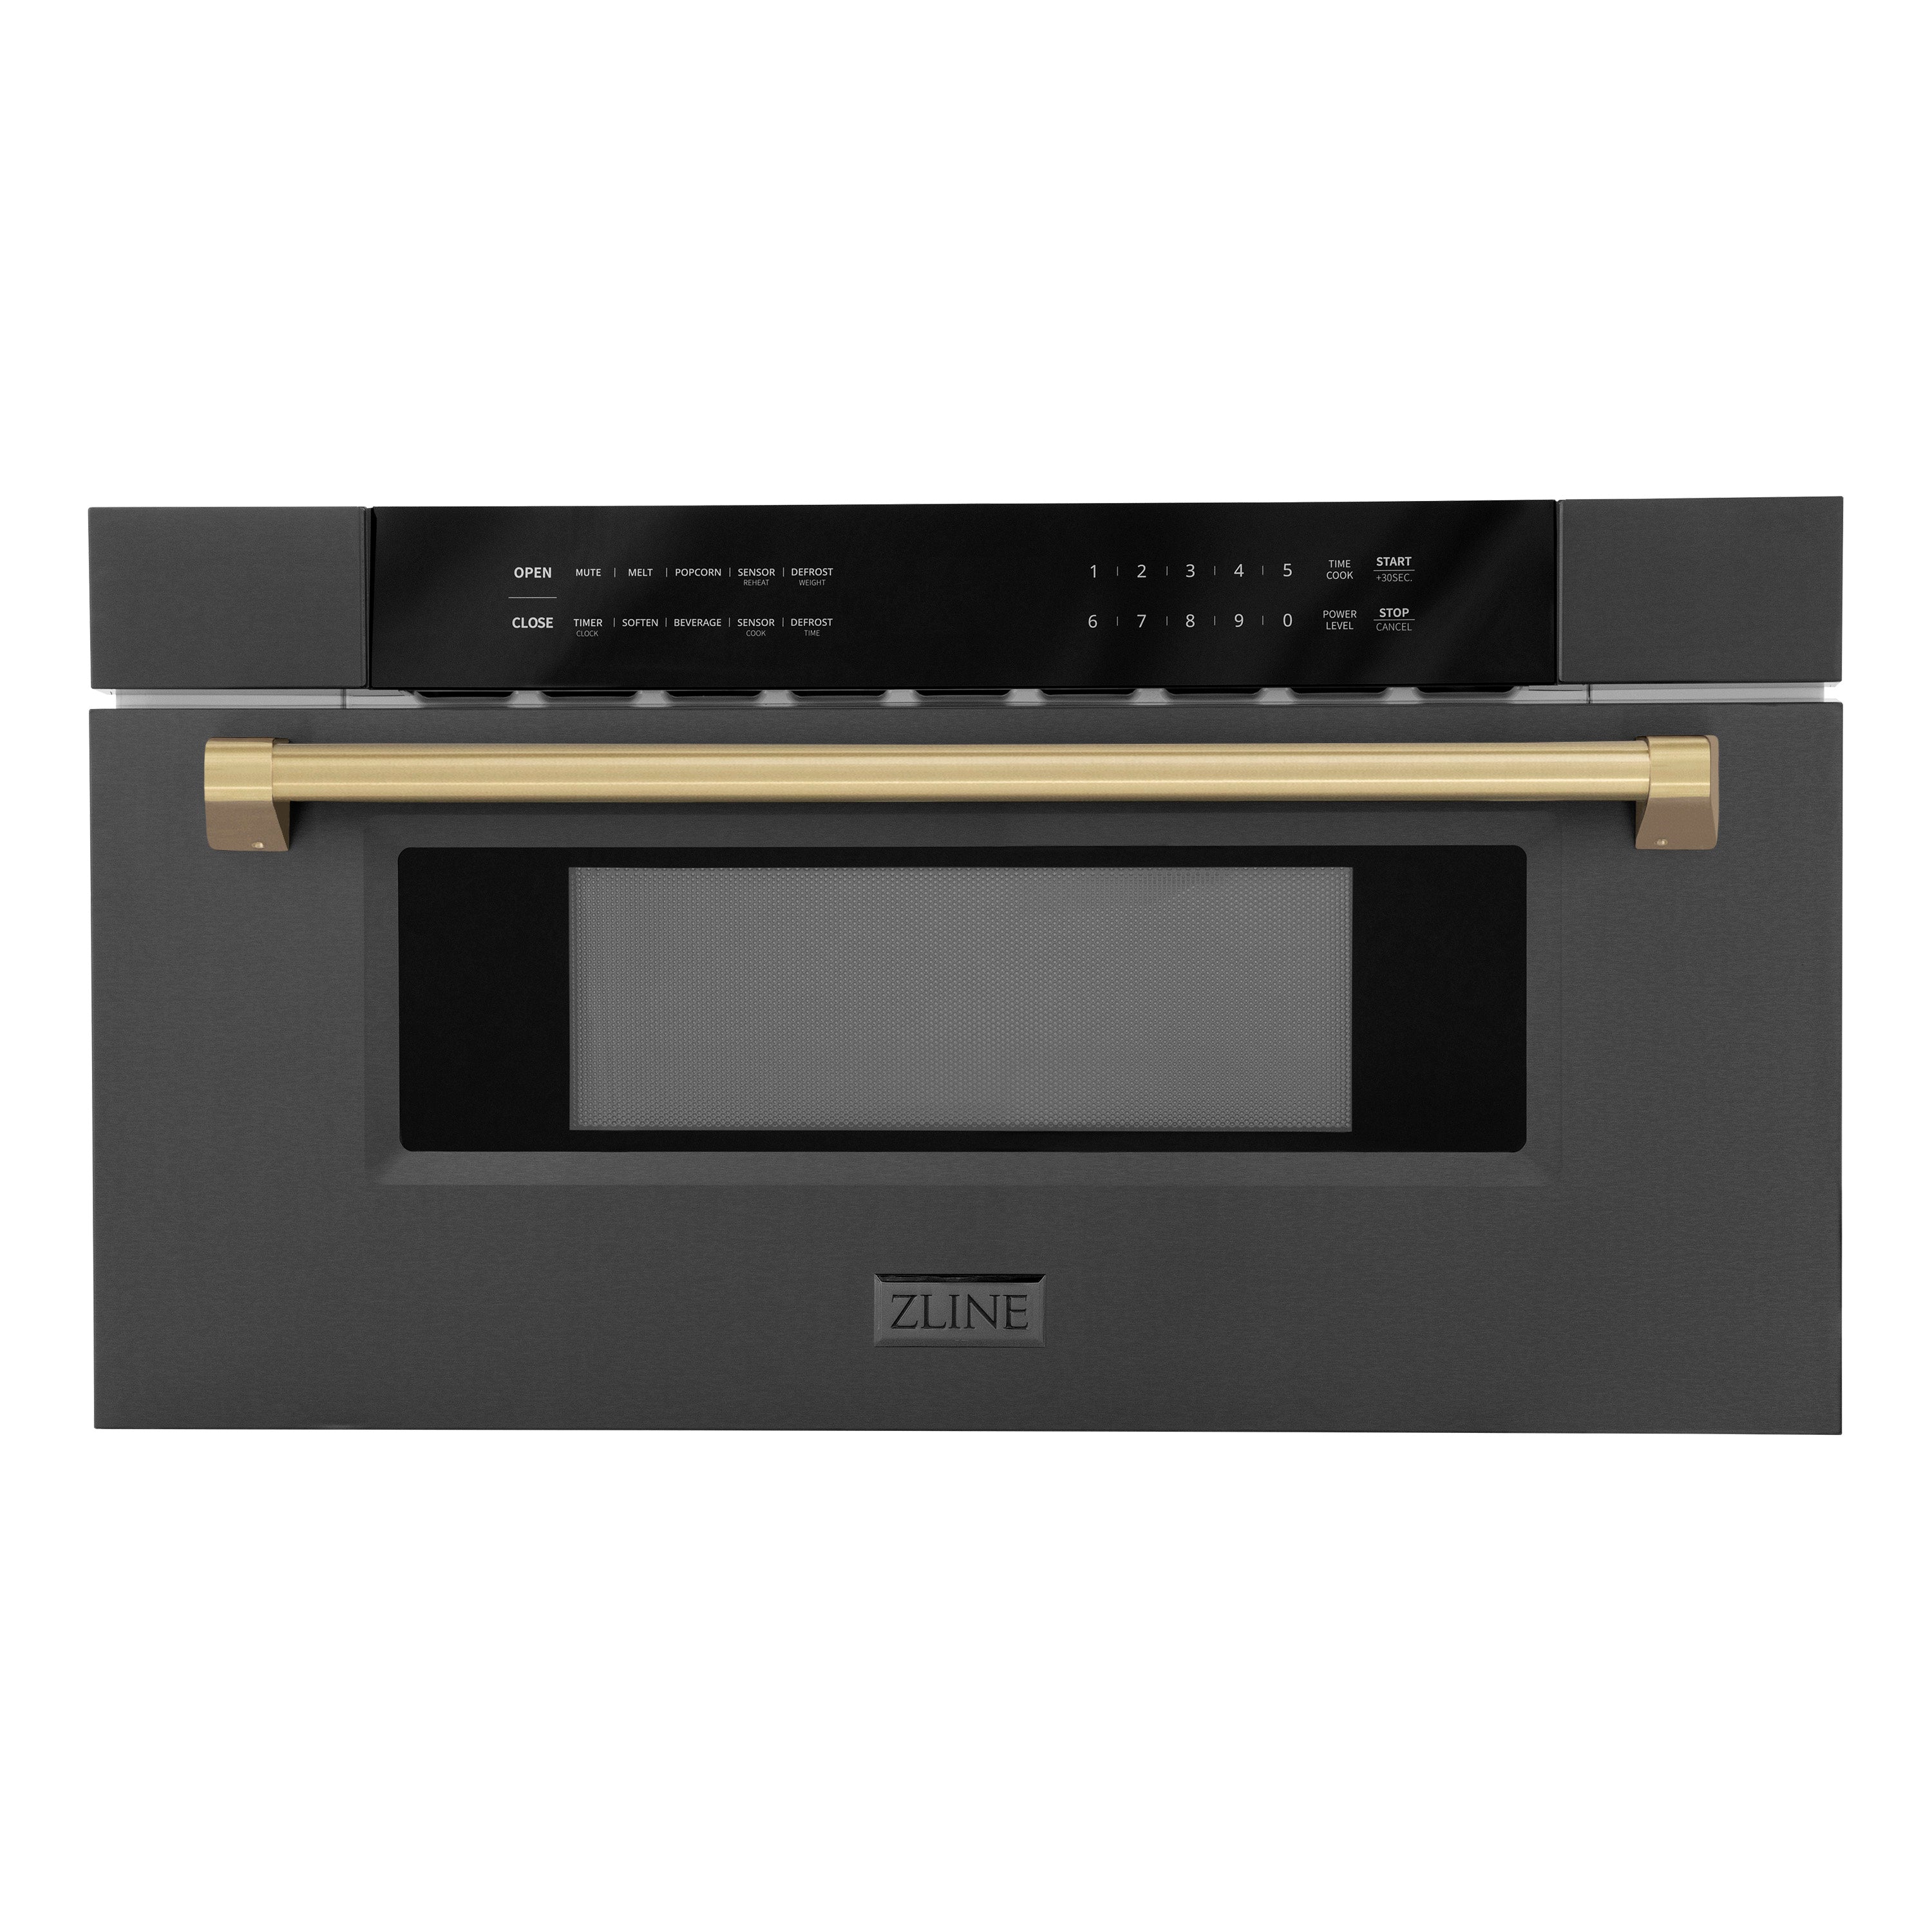 ZLINE Autograph Edition 30 in. 1.2 cu. ft. Built-in Microwave Drawer in Black Stainless Steel with Champagne Bronze Accents (MWDZ-30-BS-CB) Front View Drawer Closed